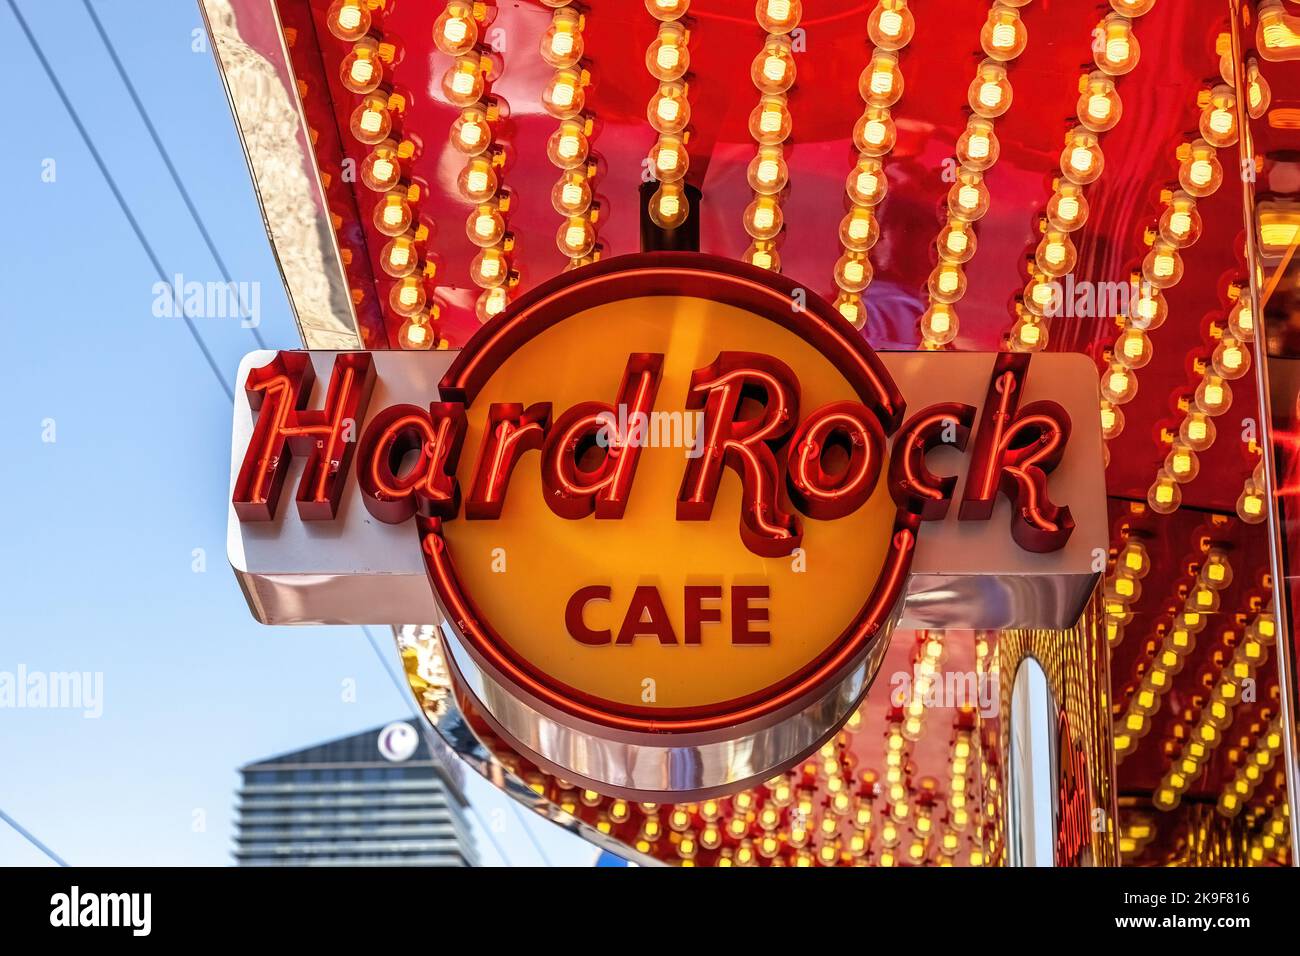 Las Vegas, USA - 24 April 2012: Close up of the iconic sign for the Hard Rock Cafe on the Strip, Las Vegas. An American themed restaurant and live roc Stock Photo